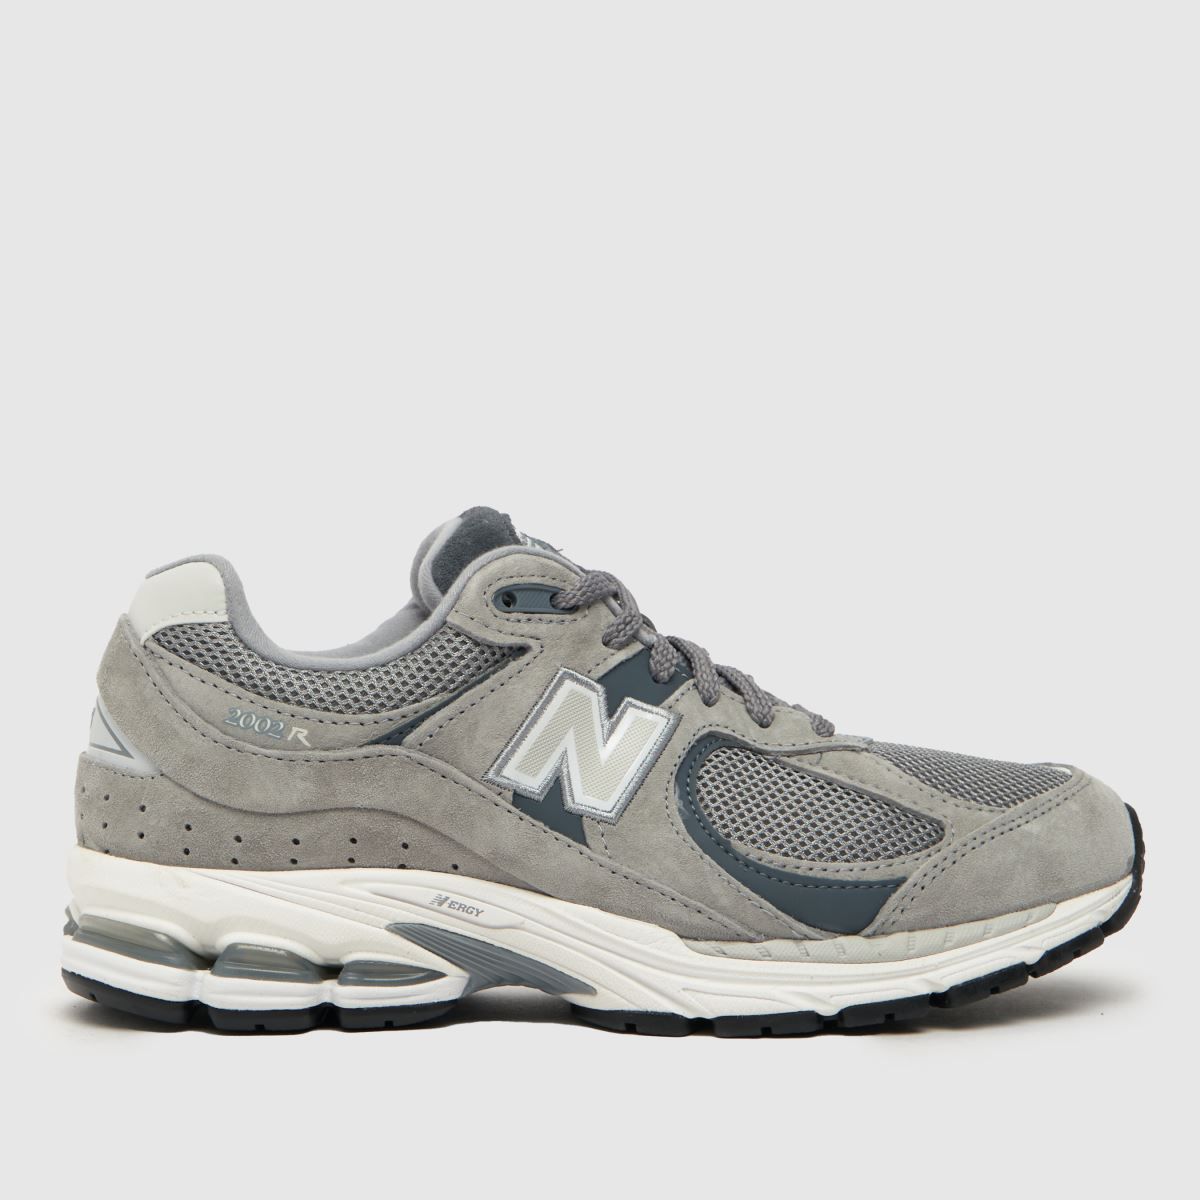 New Balance 2002r trainers in white & grey | Schuh Ireland